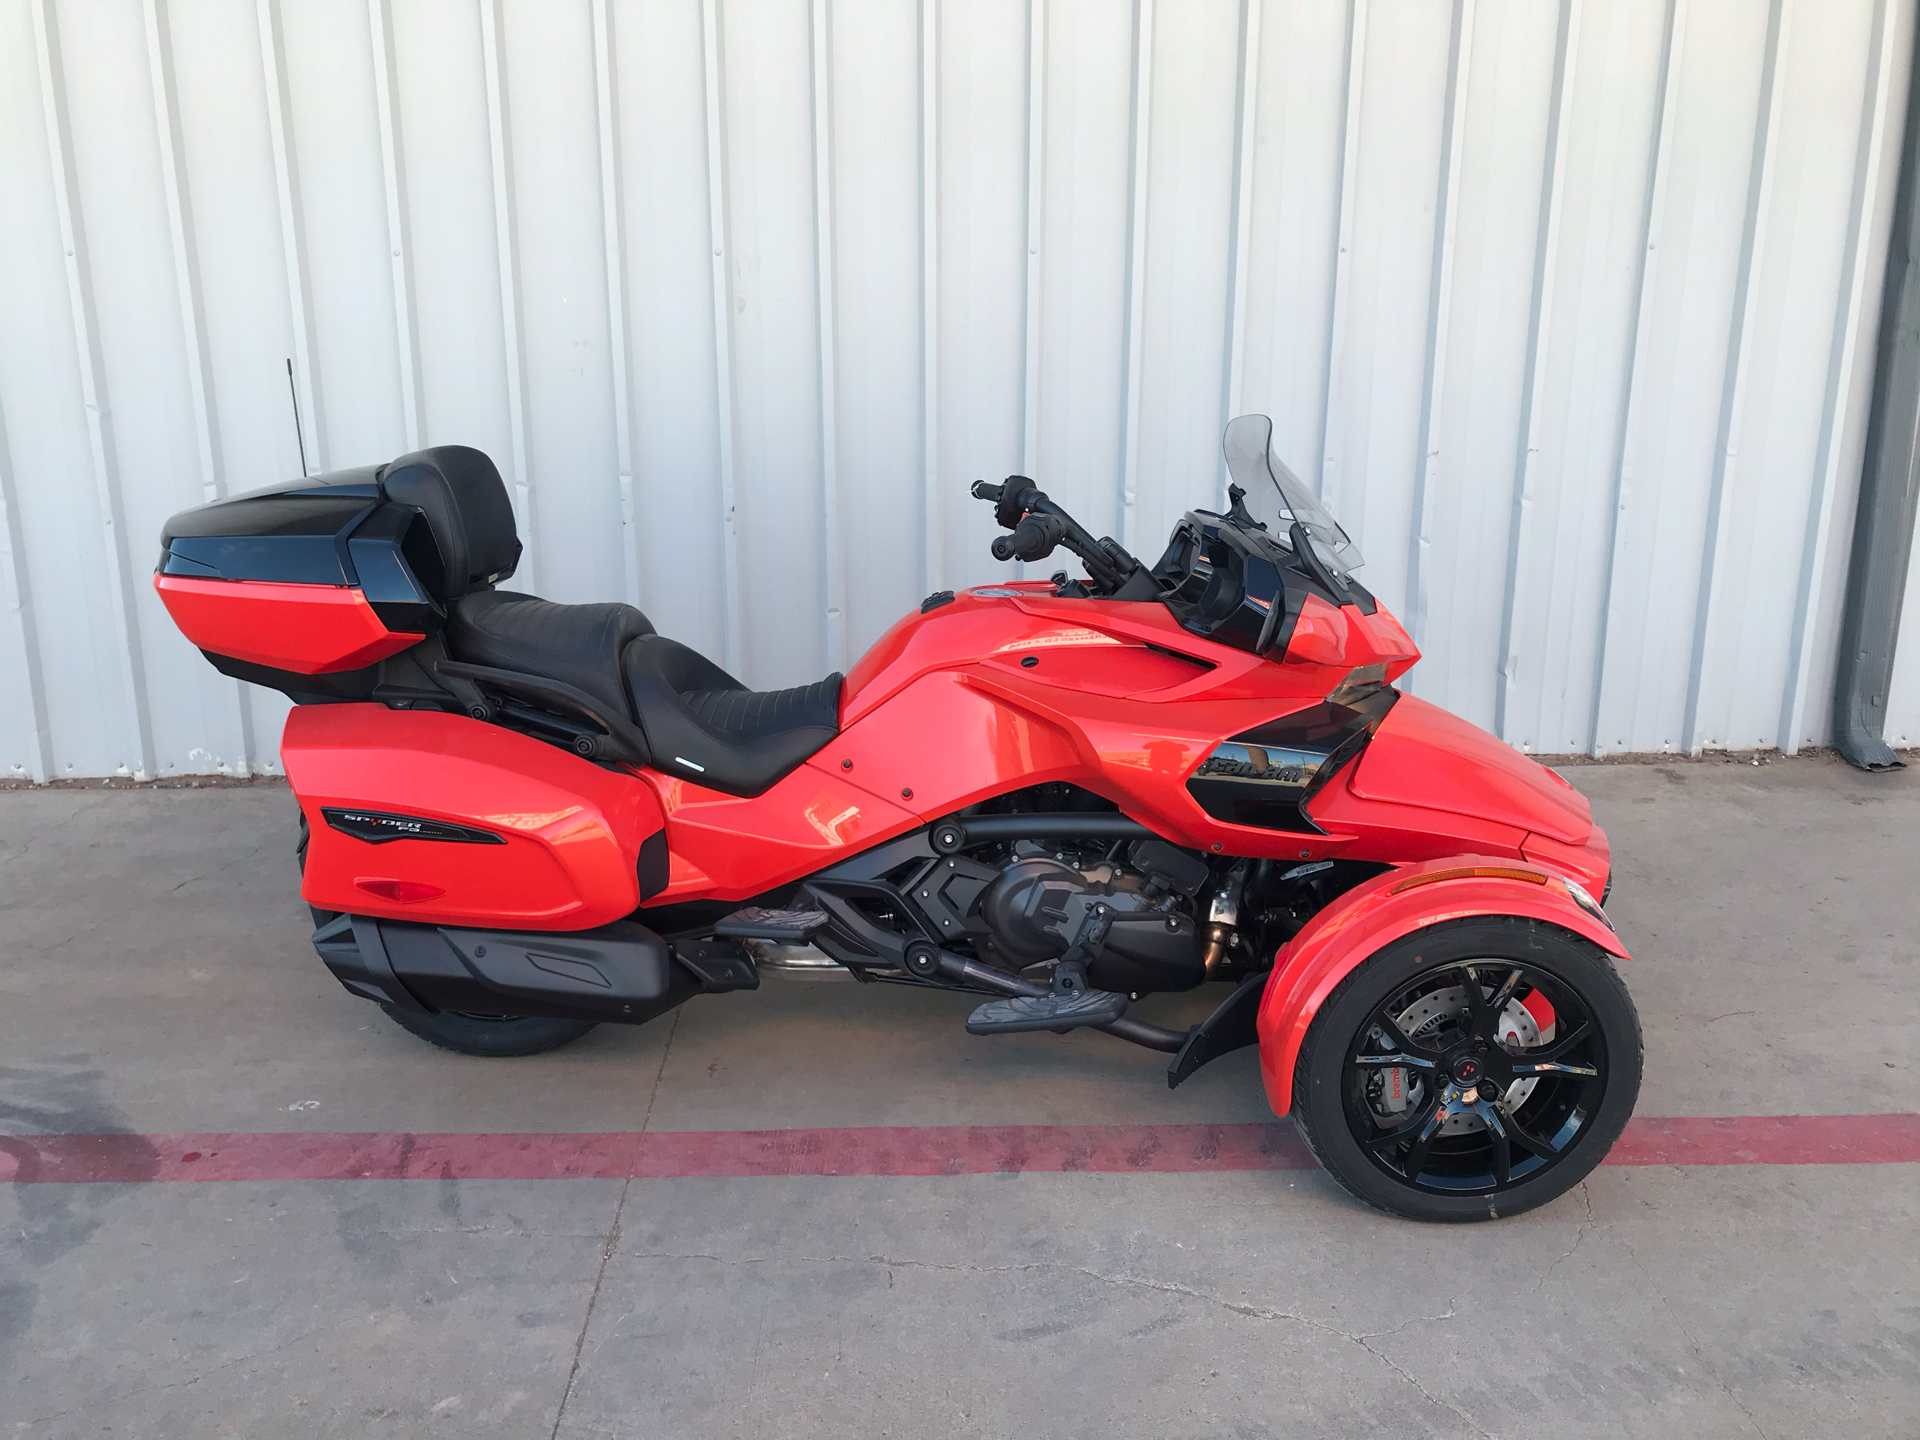 2021 Can-Am Spyder F3 Limited in Amarillo, Texas - Photo 1